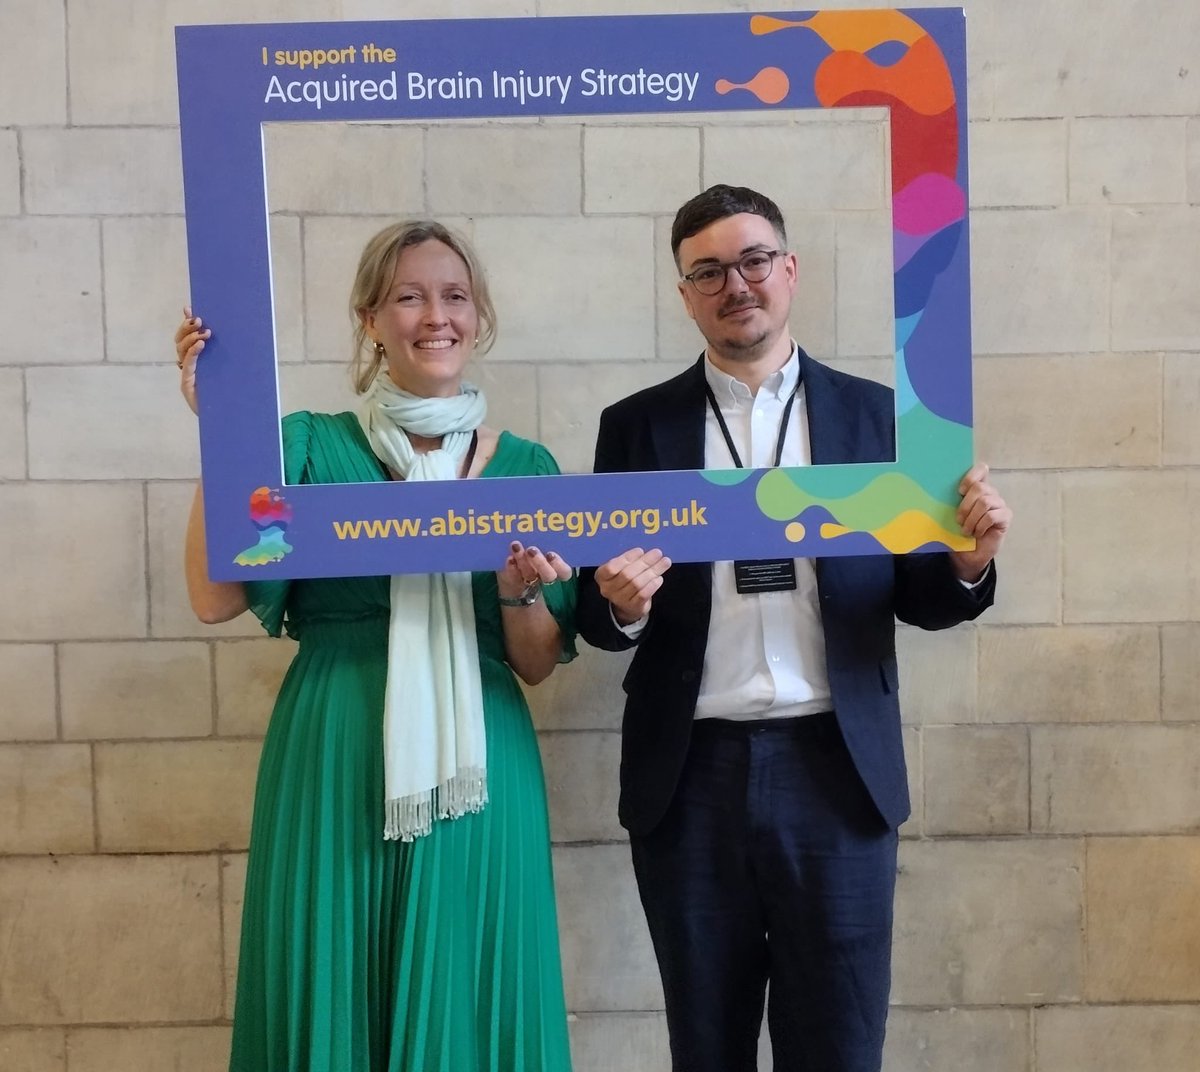 Brilliant to be discussing neuro in Parliament today - fantastic events by @HDA_tweeting and @UKABIF raising awareness and calling for much needed improvements to services and support @NeuroAlliance #BackThe1in6